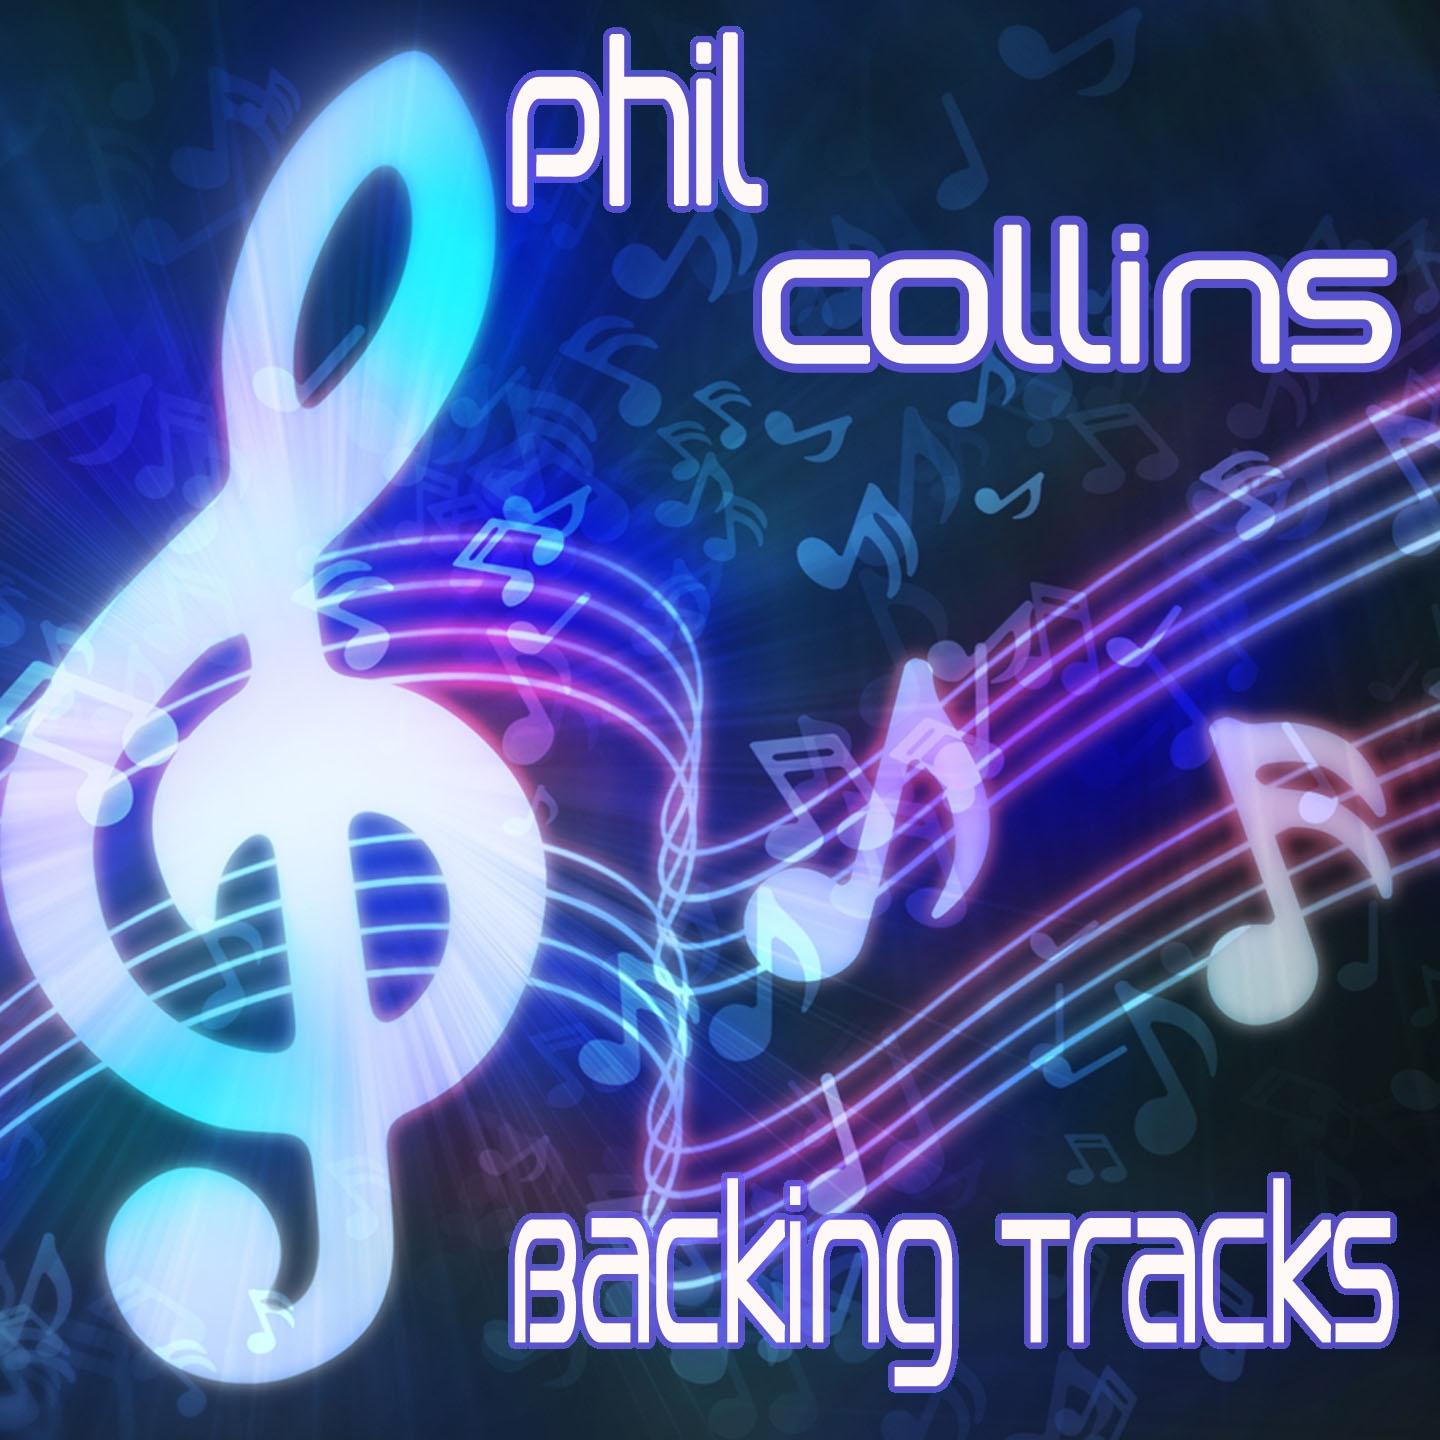 Phil Collins: Backing Tracks